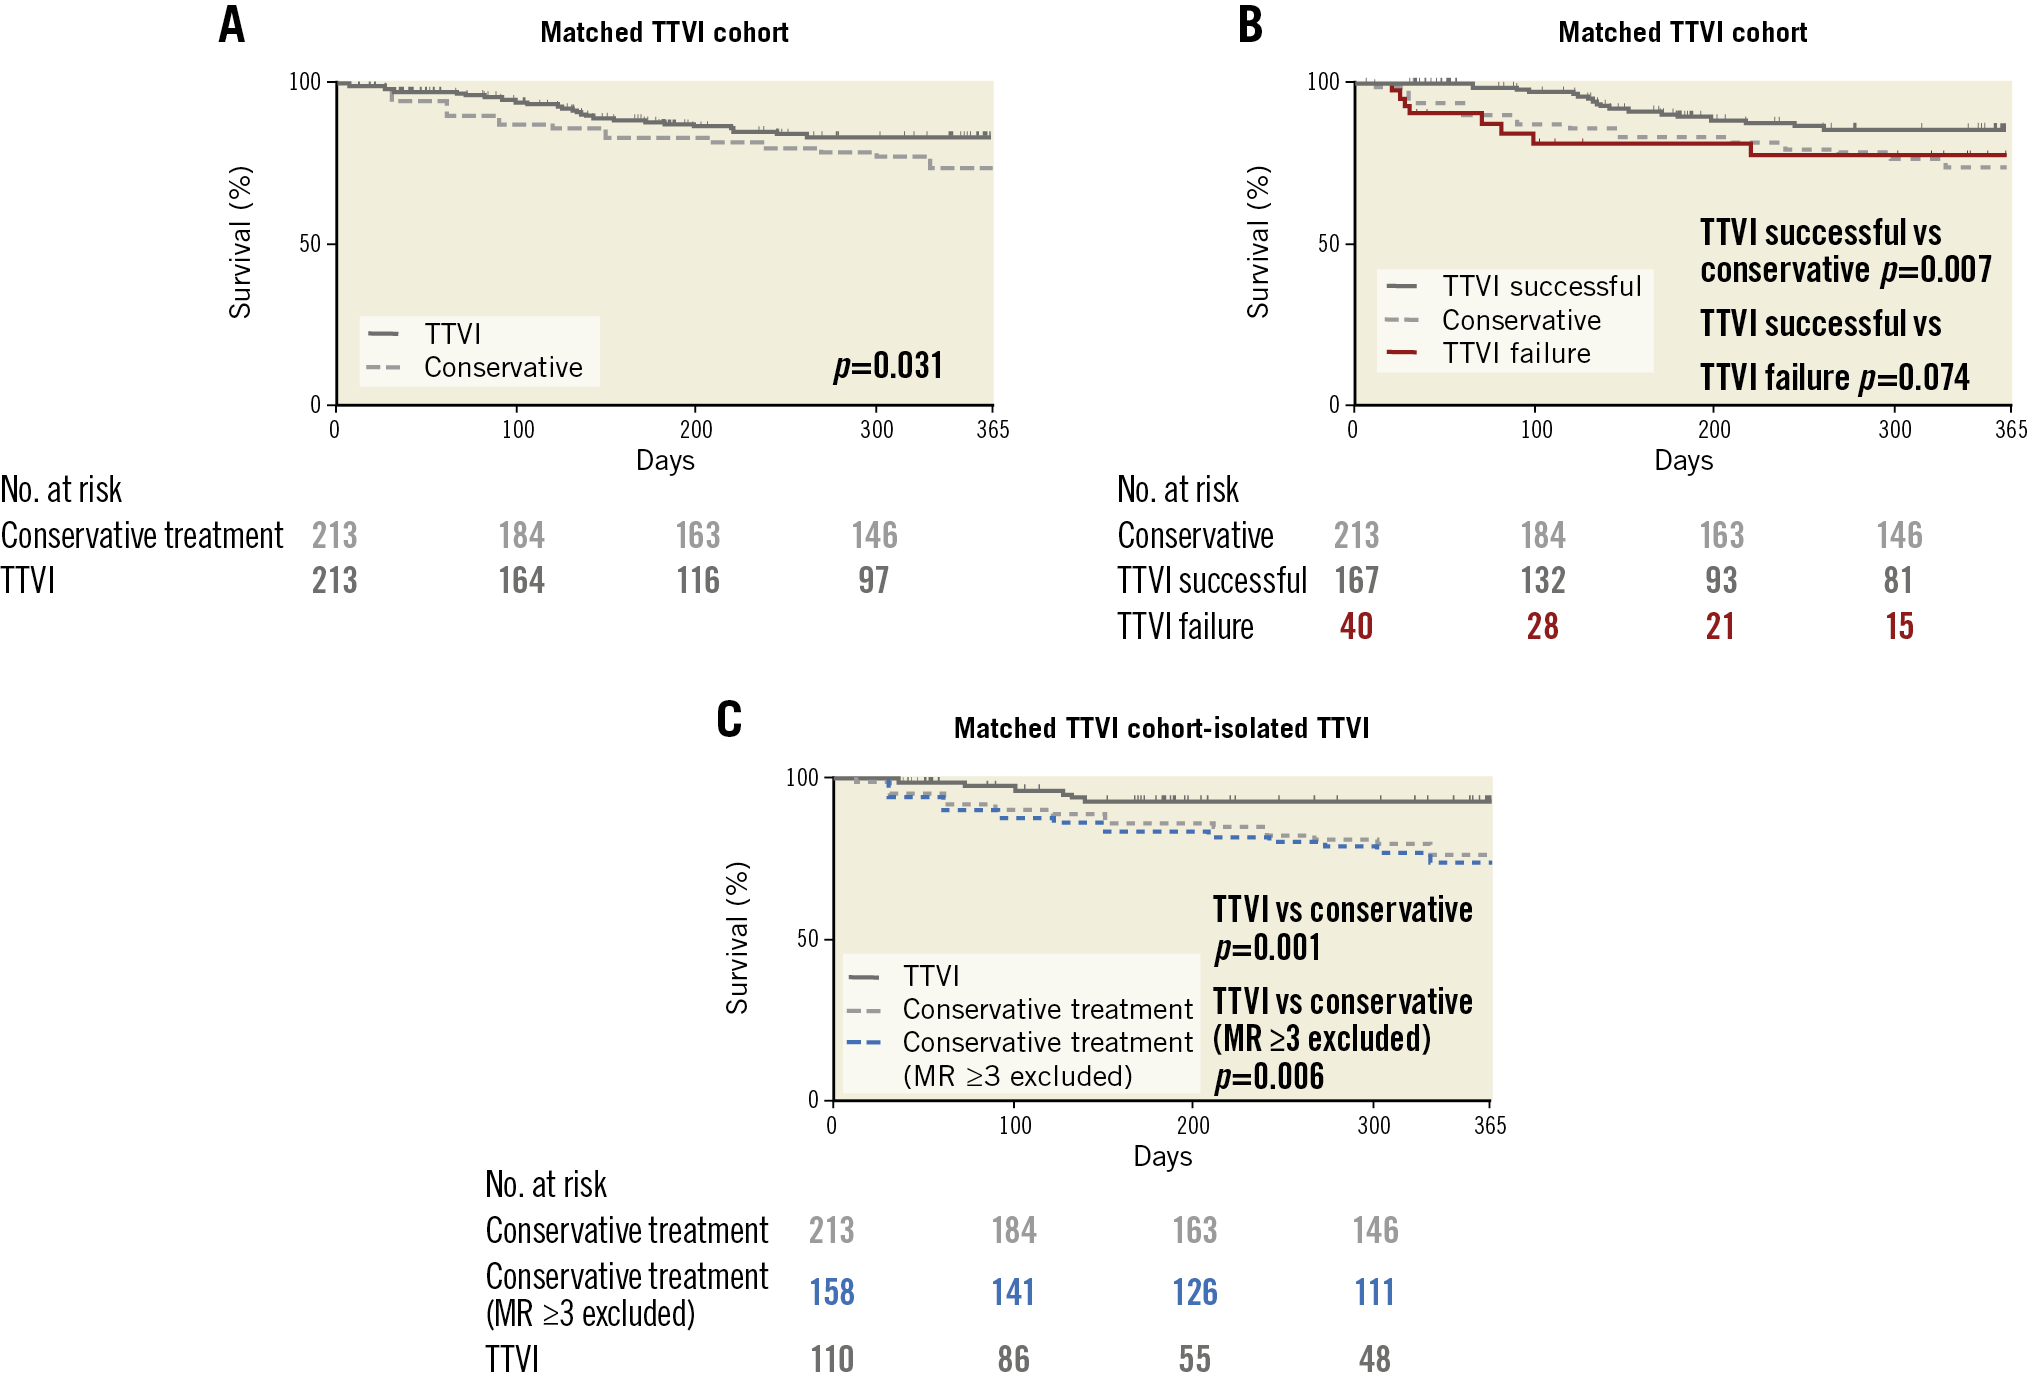 Figure 1. Reduced mortality after transcatheter tricuspid valve intervention (TTVI) compared to conservative treatment. A) Survival in patients after TTVI or conservative treatment in the propensity score-matched cohort. Kaplan-Meier analysis; N=426; p for log-rank test. B) Kaplan- Meier analysis for survival in patients after TTVI at one year stratified for procedural success in the propensity score-matched TTVI cohort. N=420; p for log-rank test. C) Survival in patients after TTVI or conservative treatment (patients with MR ≥grade 3 excluded) in the propensity score-matched cohort. Kaplan-Meier analysis; N=268; p for log-rank test.